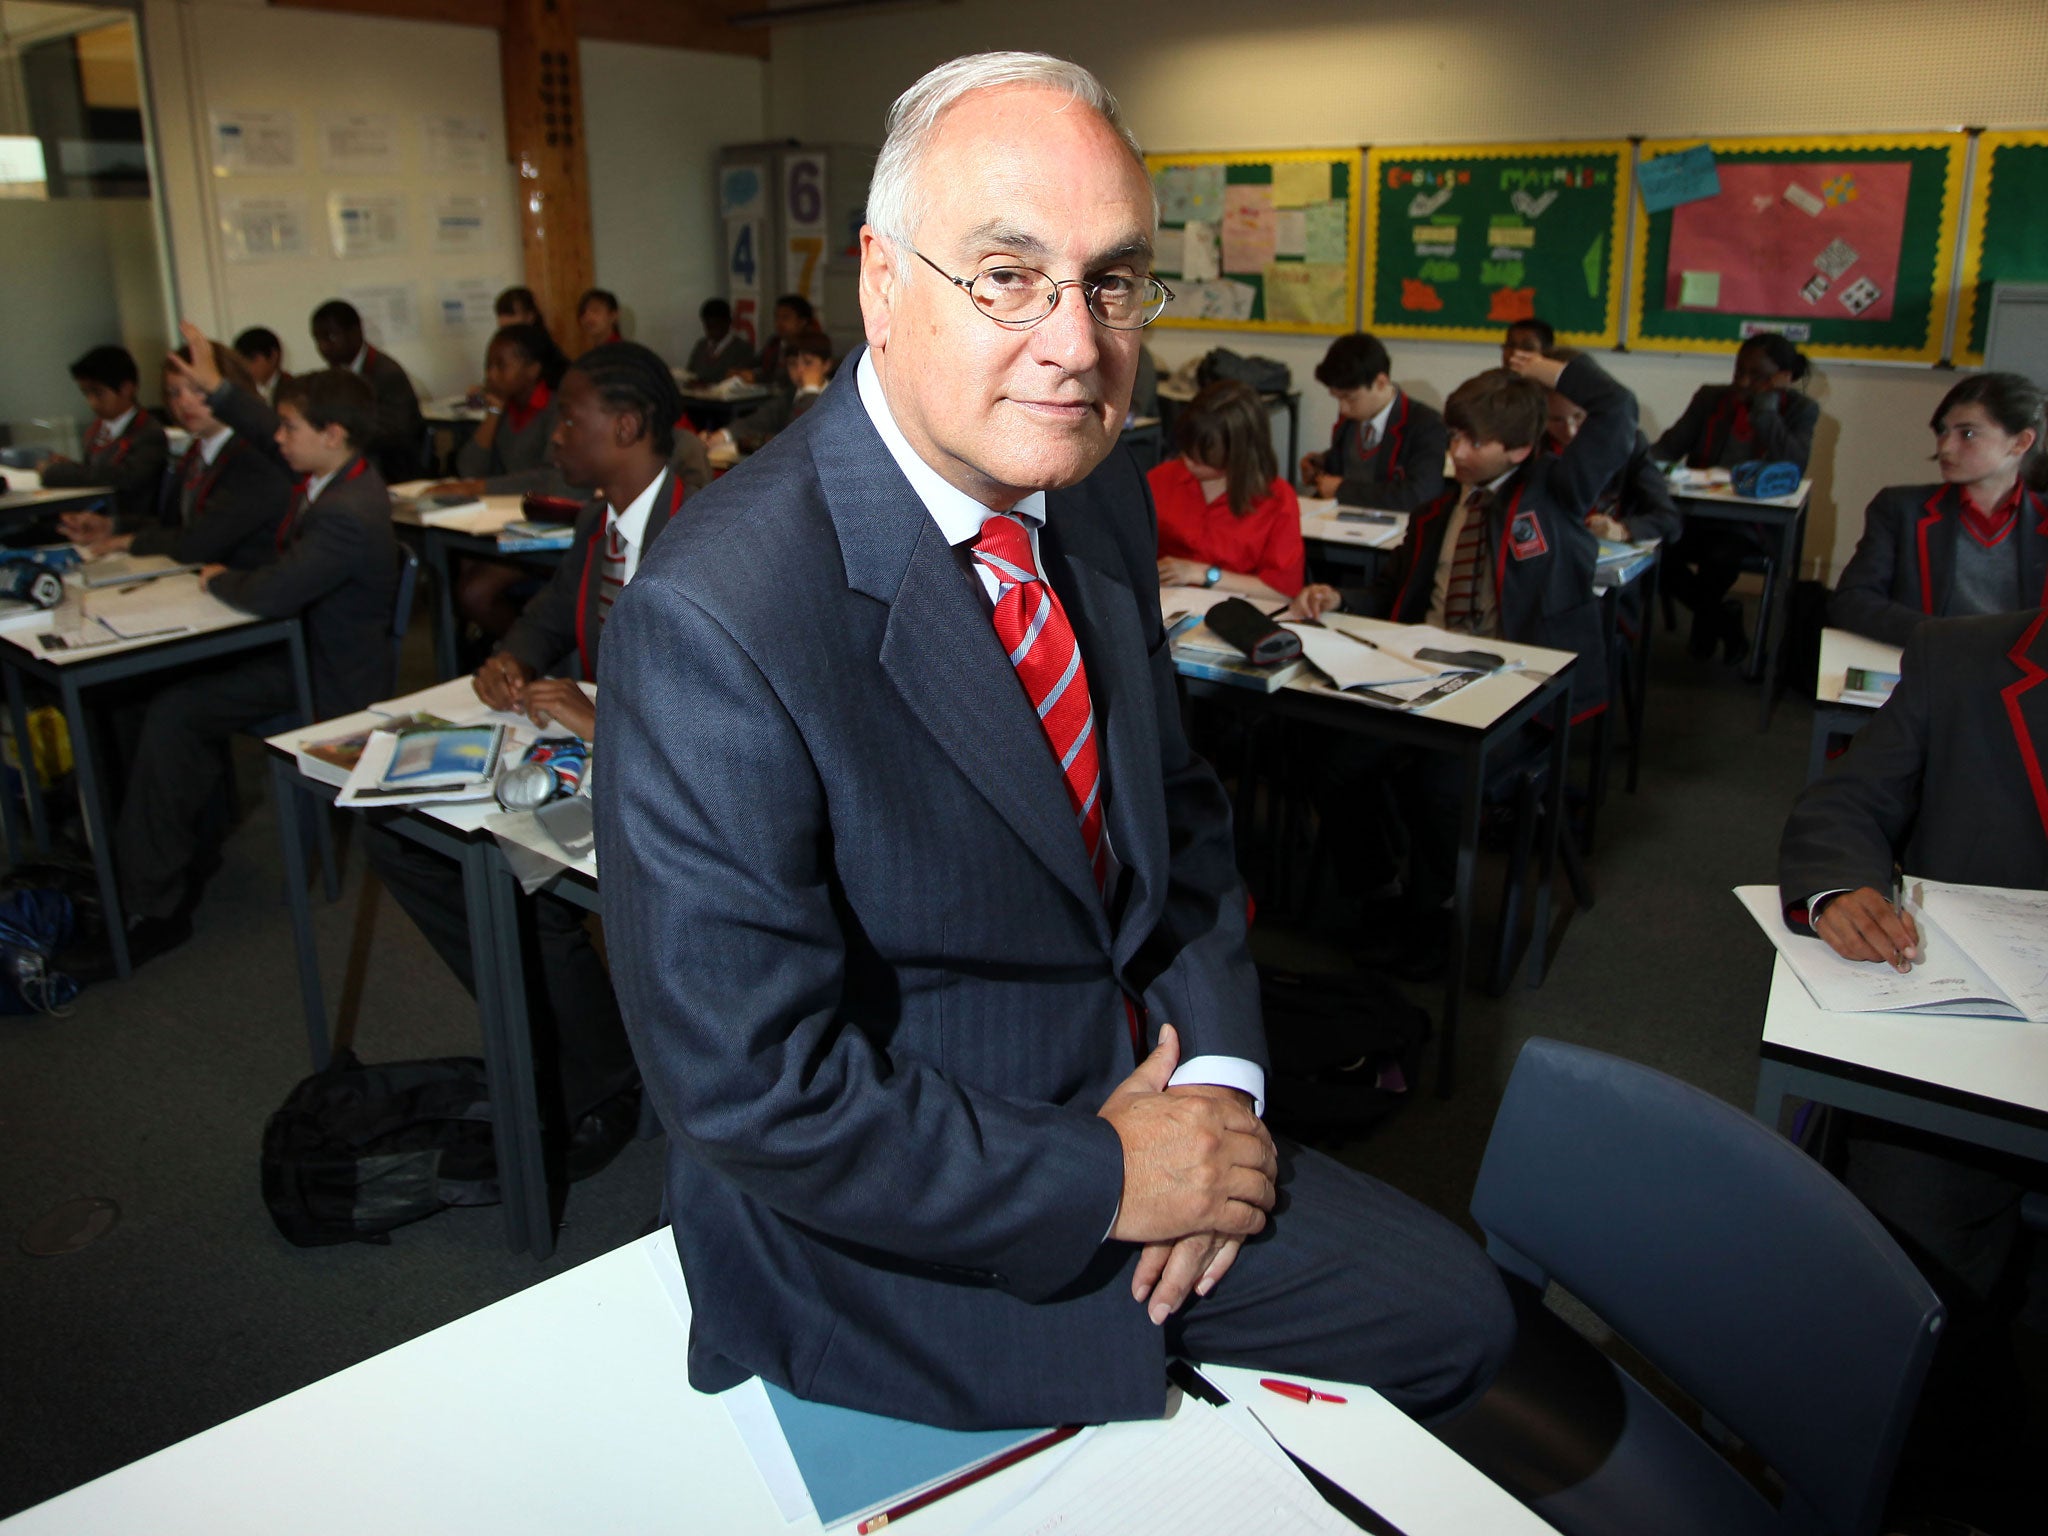 Sir Michael Wilshaw has called for more effort to be put into ensuring disadvantaged families take up their entitlement